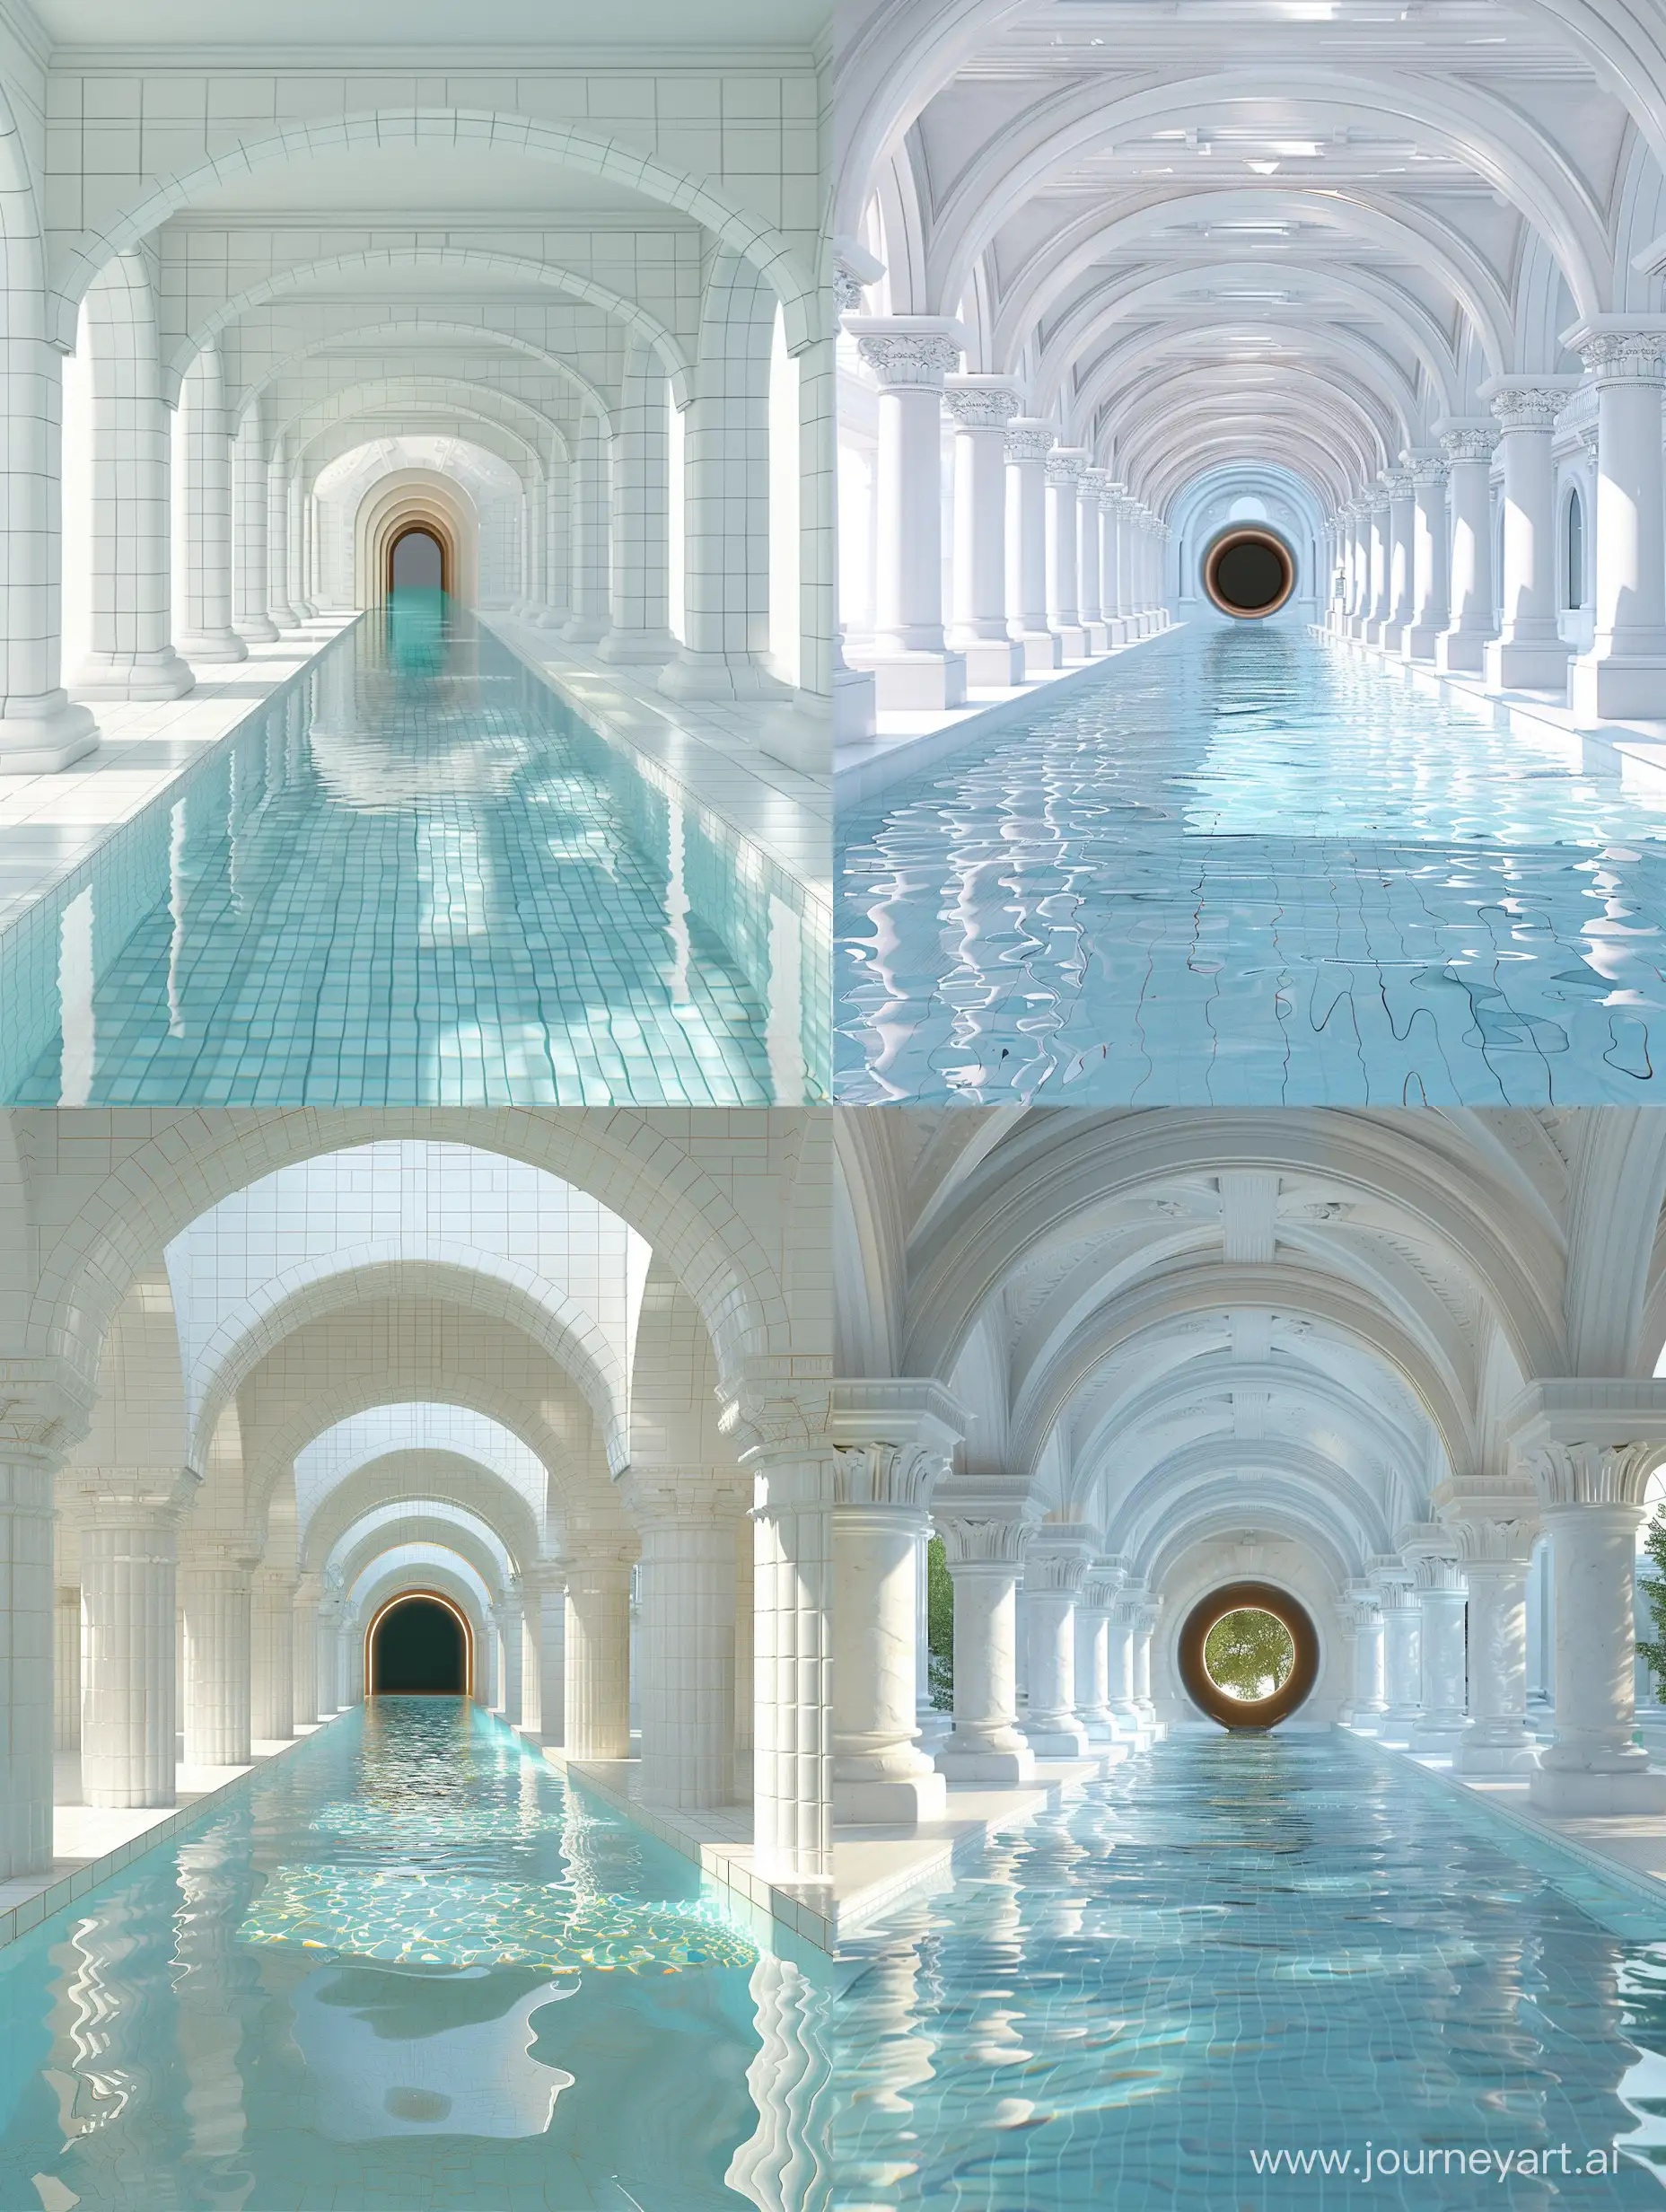 a tunnel in the middle of a swimming pool, a photorealistic painting, by Jan Kupecký, op art, made of all white ceramic tiles, fountains and arches, rinko kawauchi, vray renderer